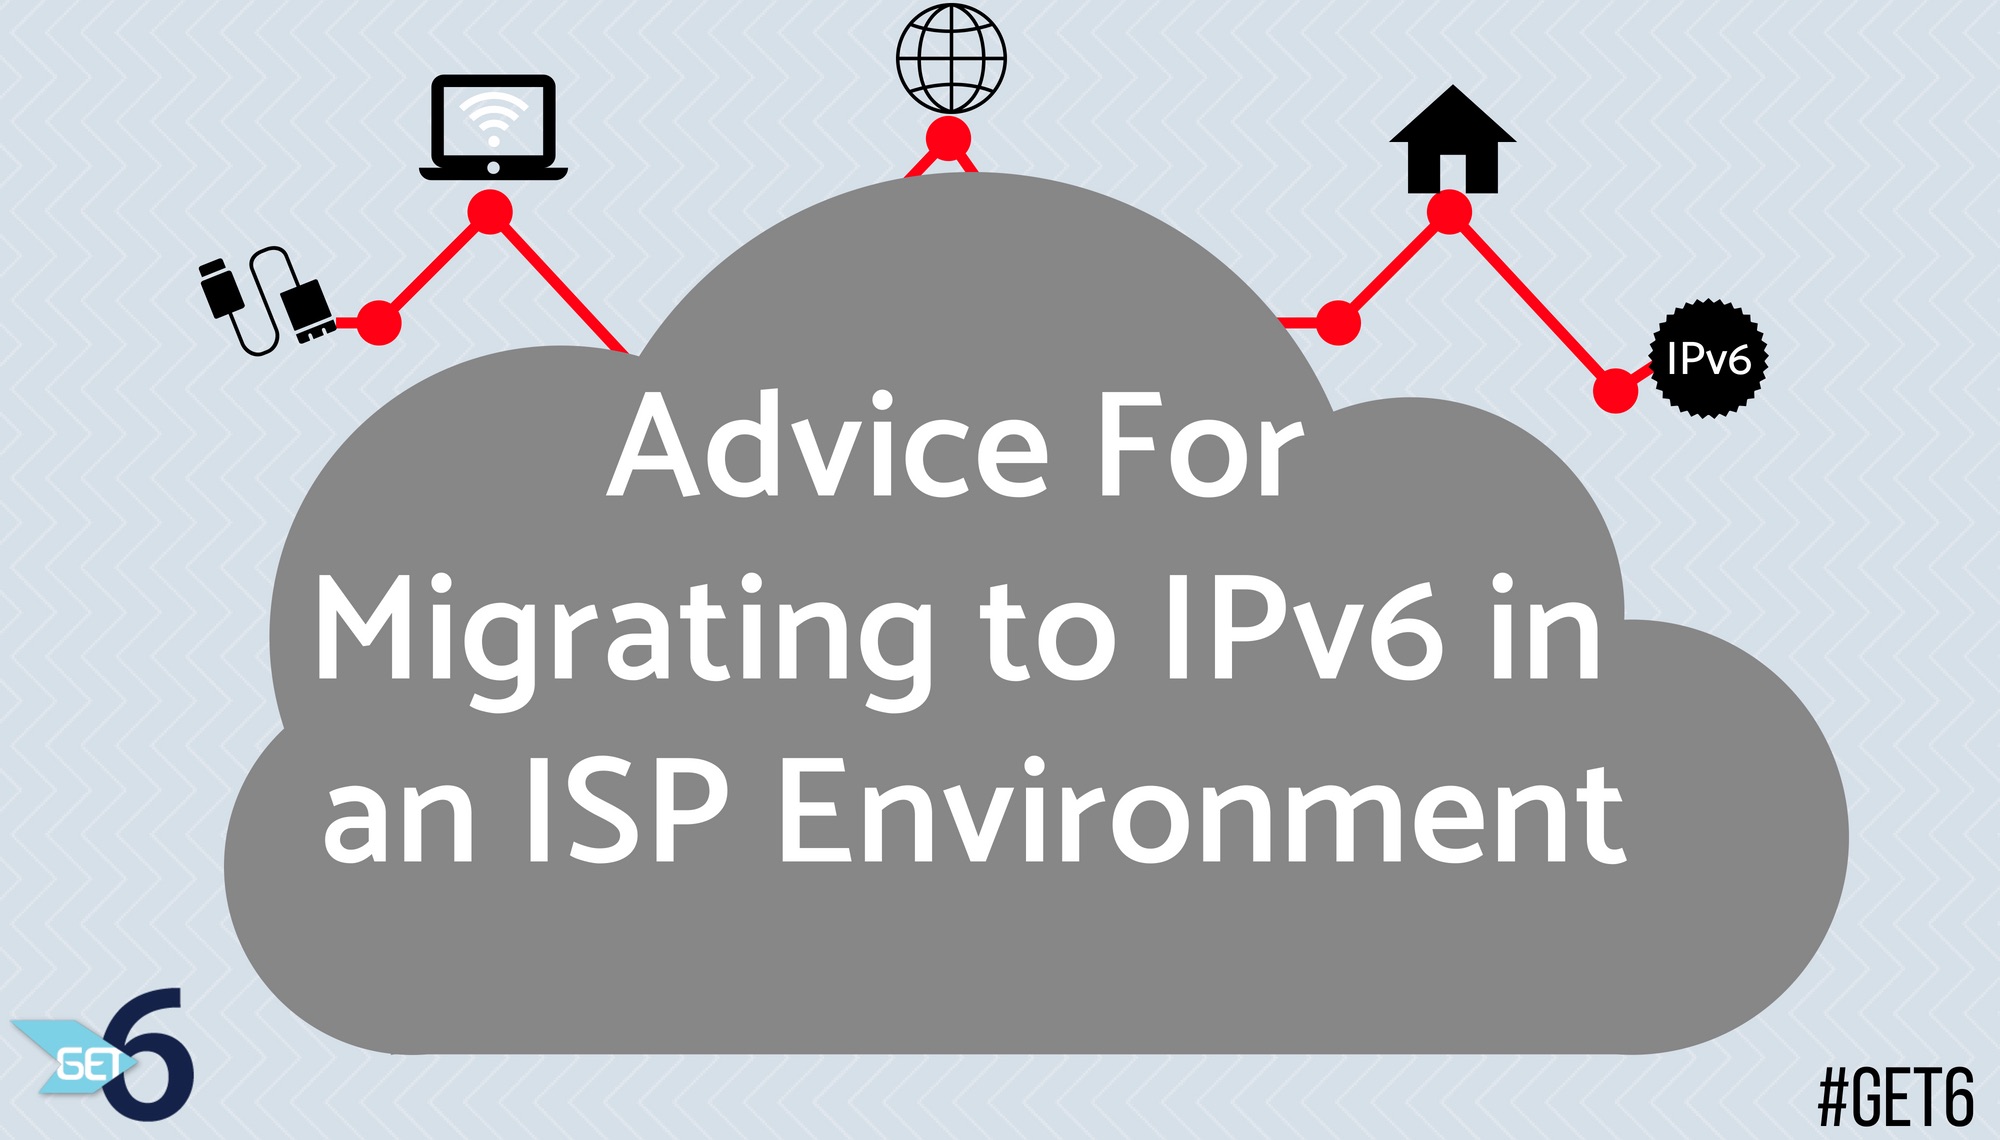 Advice for migrating to IPv6 in an ISP environment